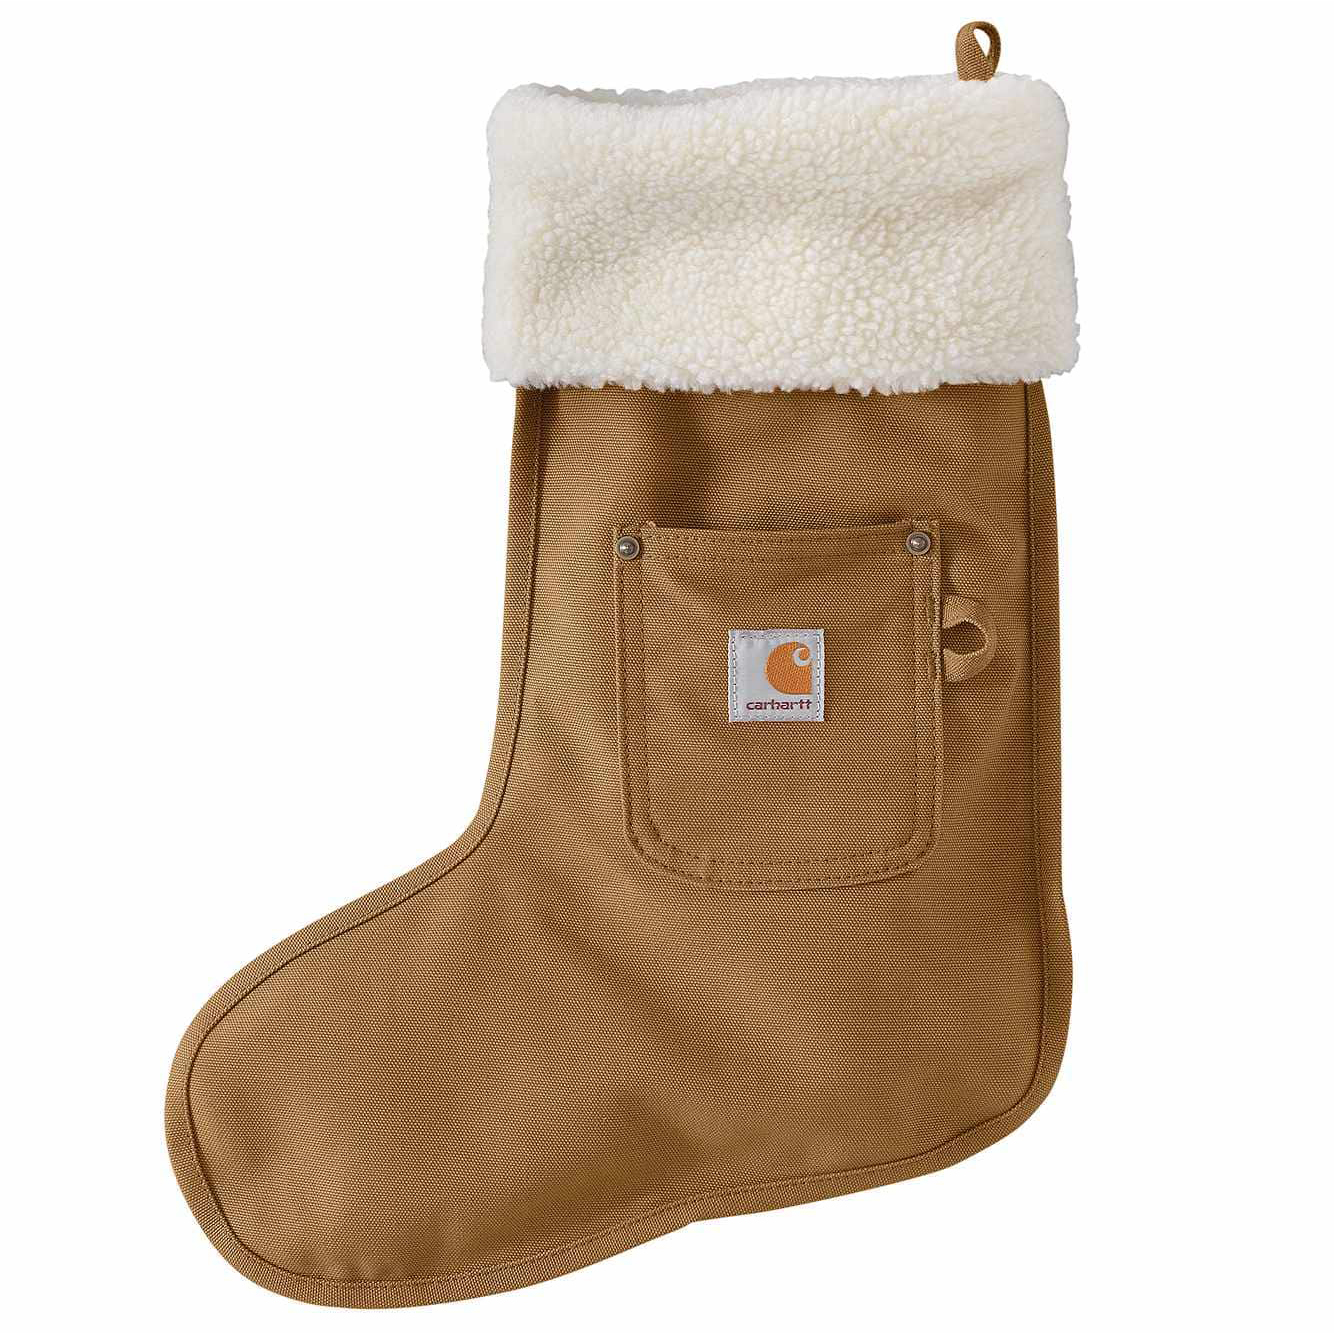 Carhartt 102301-211 Delete-OS Christmas Stocking, One-Size, Cotton Duck, Brown - 1